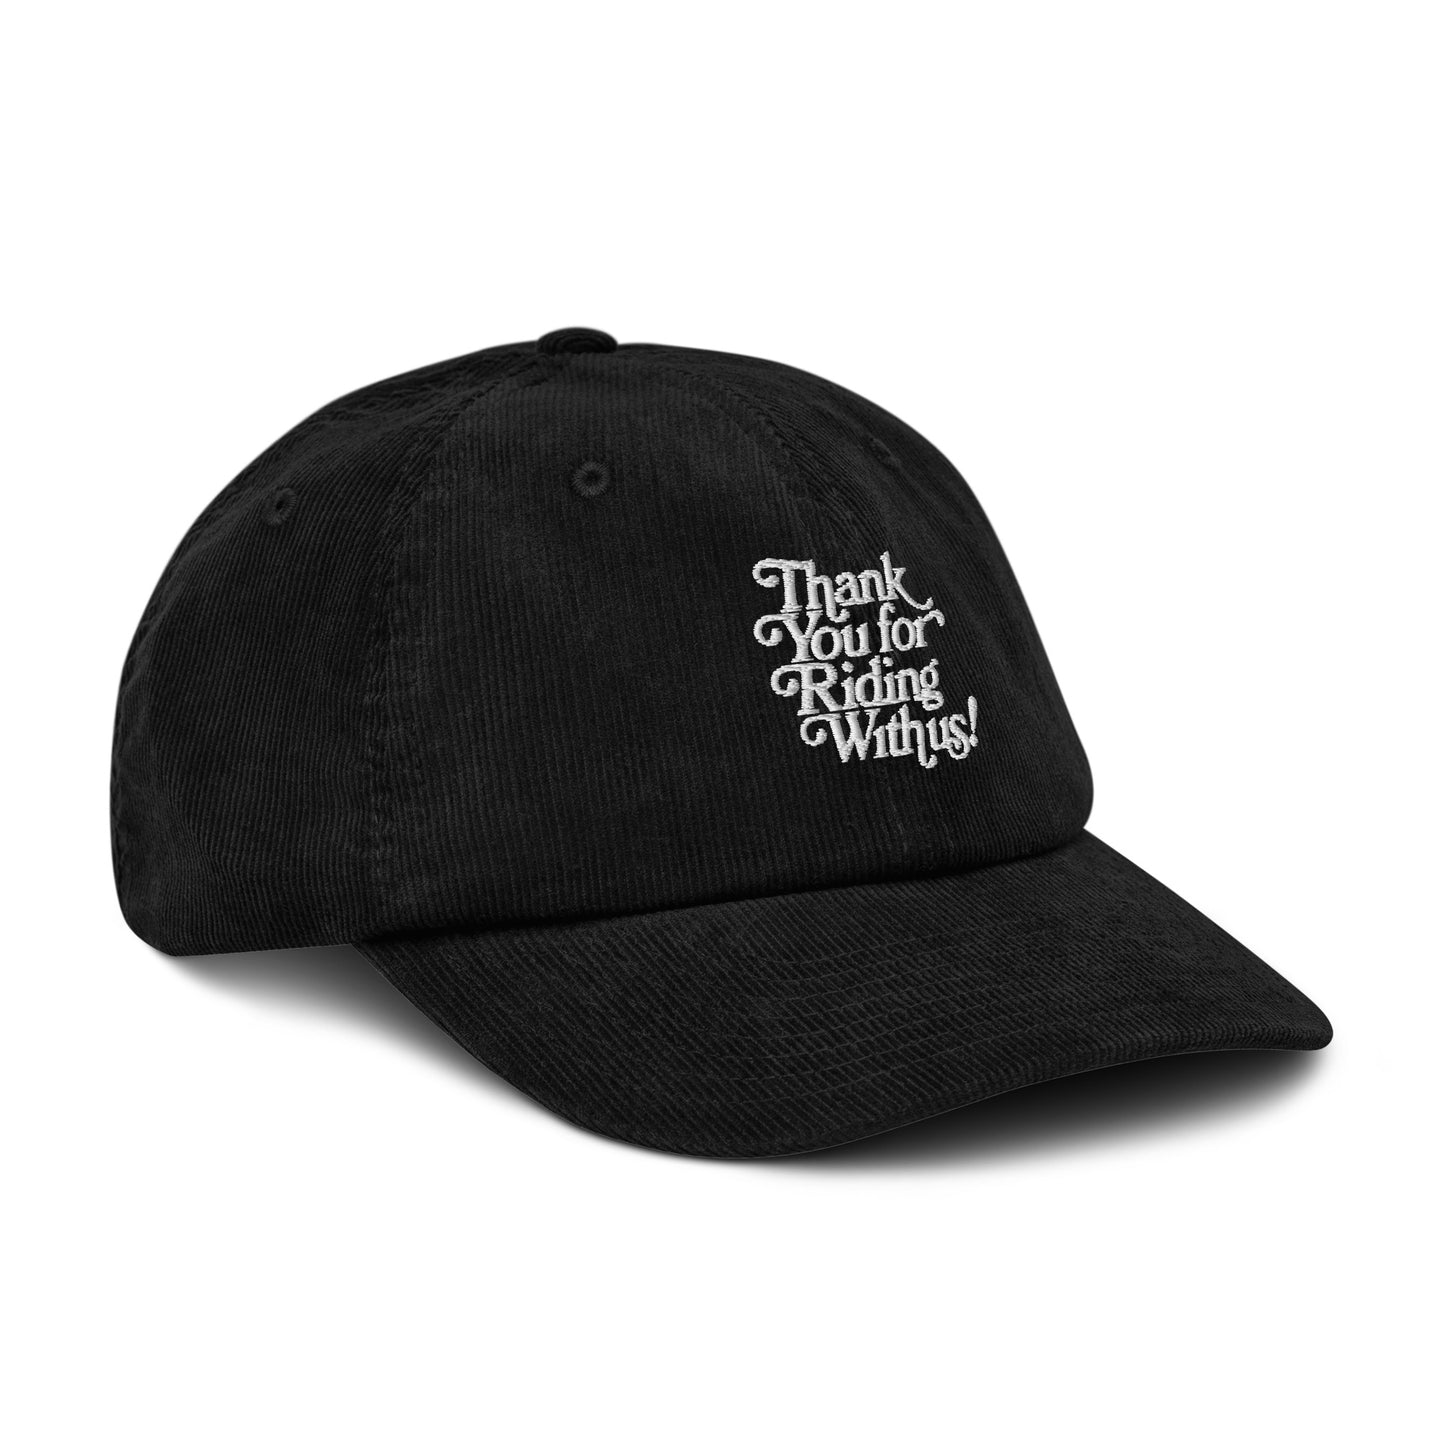 Thank You For Riding With Us! Embroidered Corduroy Cap Black